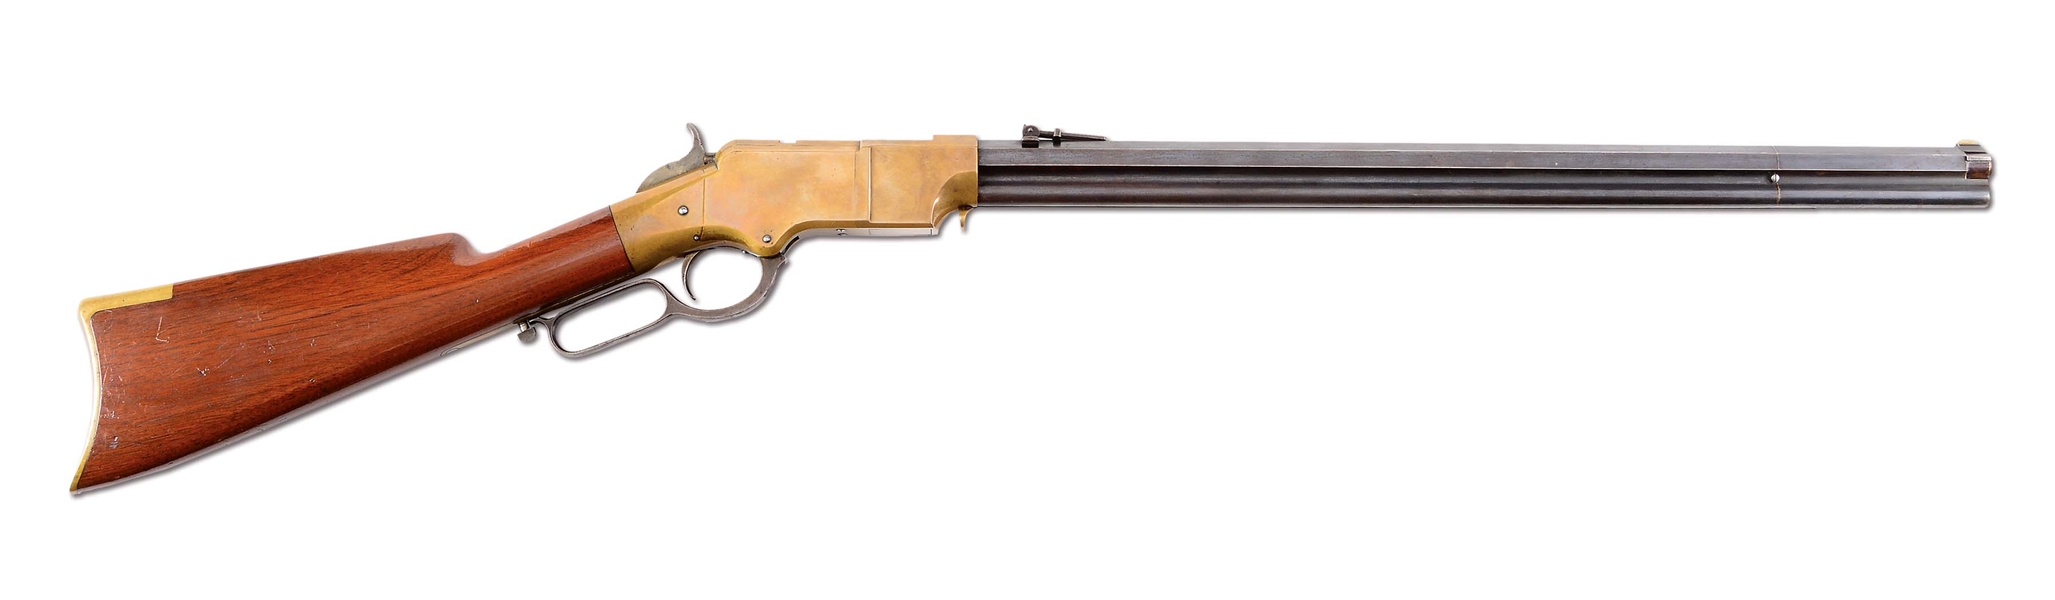 (A) MAGNIFICENT NEW HAVEN ARMS MODEL 1860 HENRY LEVER ACTION RIFLE (1862).